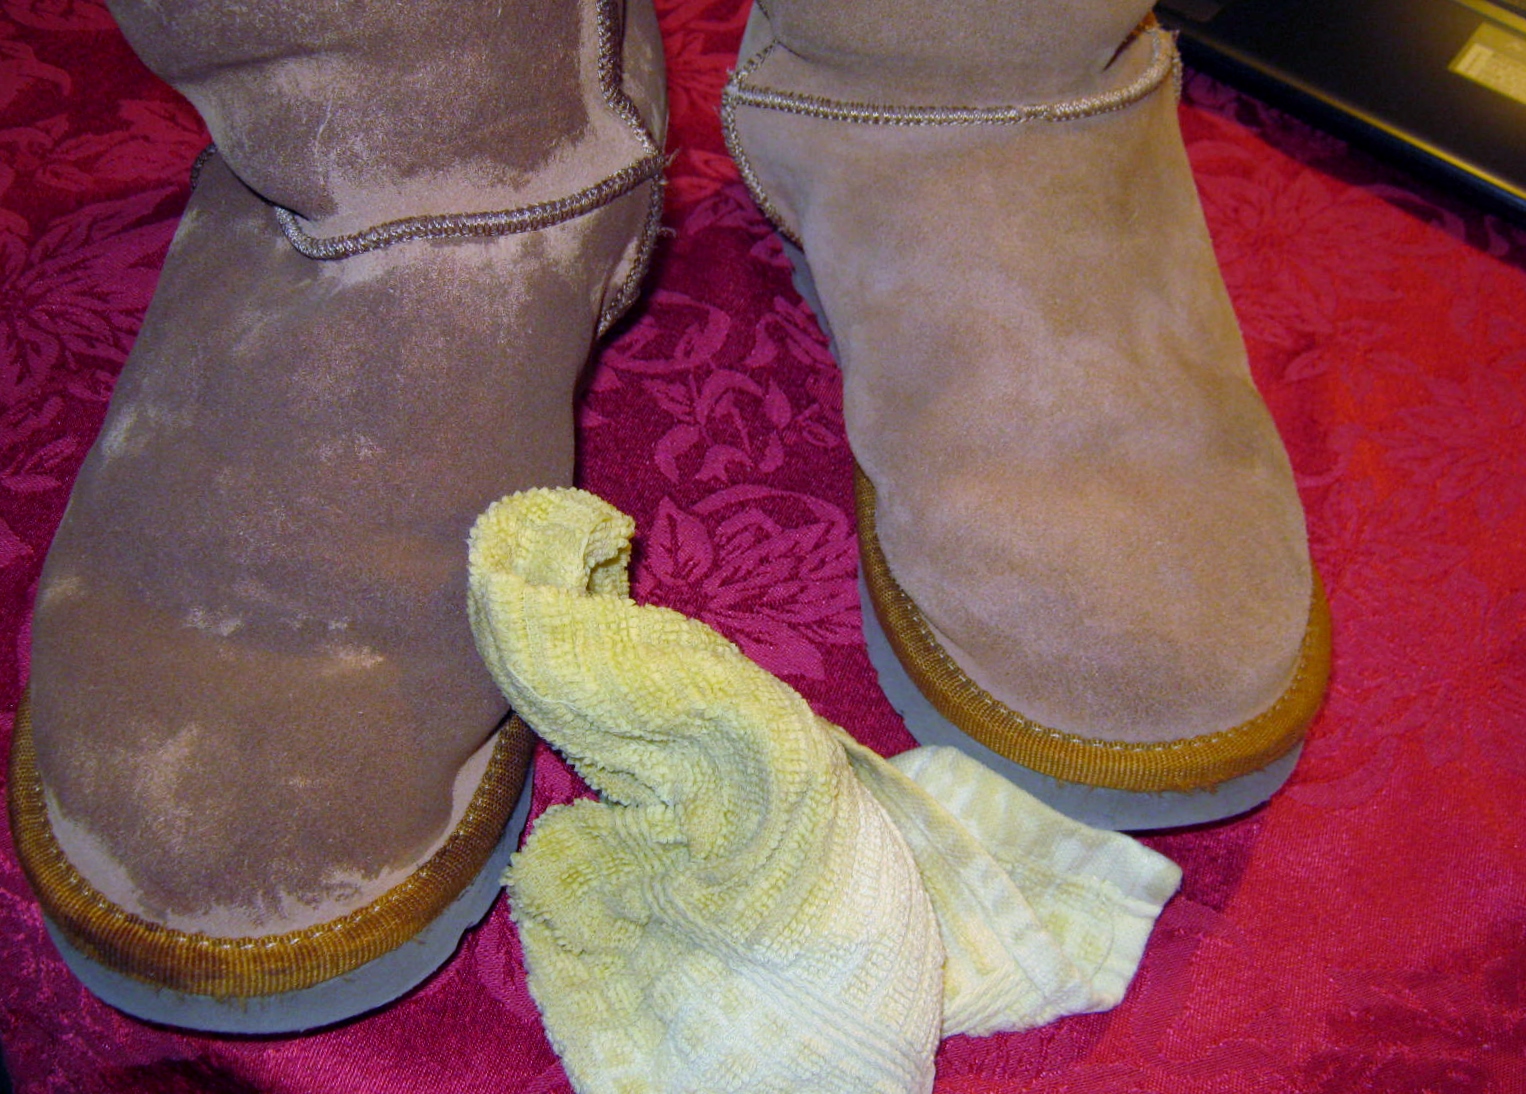 how to remove salt stains from black uggs